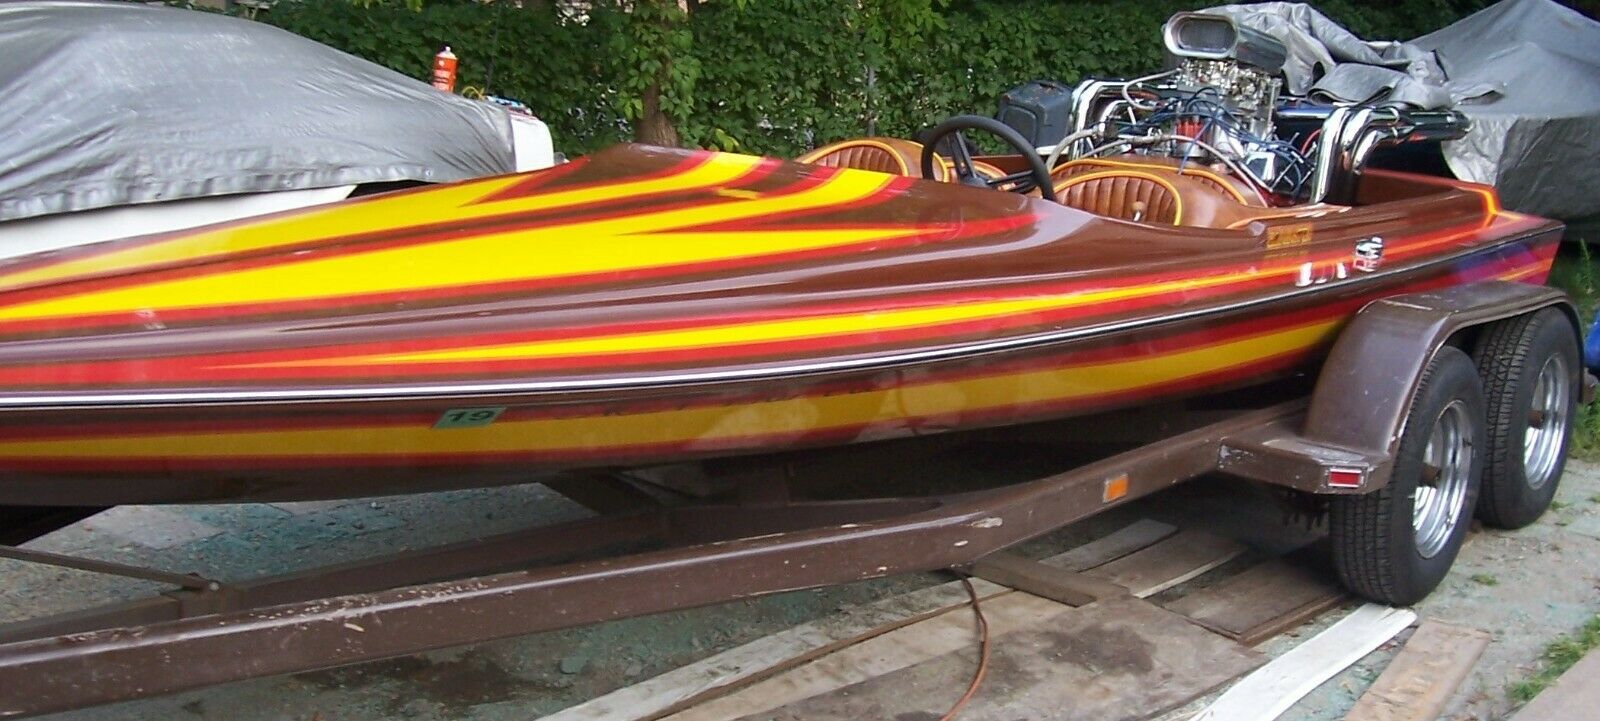 Eliminator 1978 for sale for $7,500 - Boats-from-USA.com